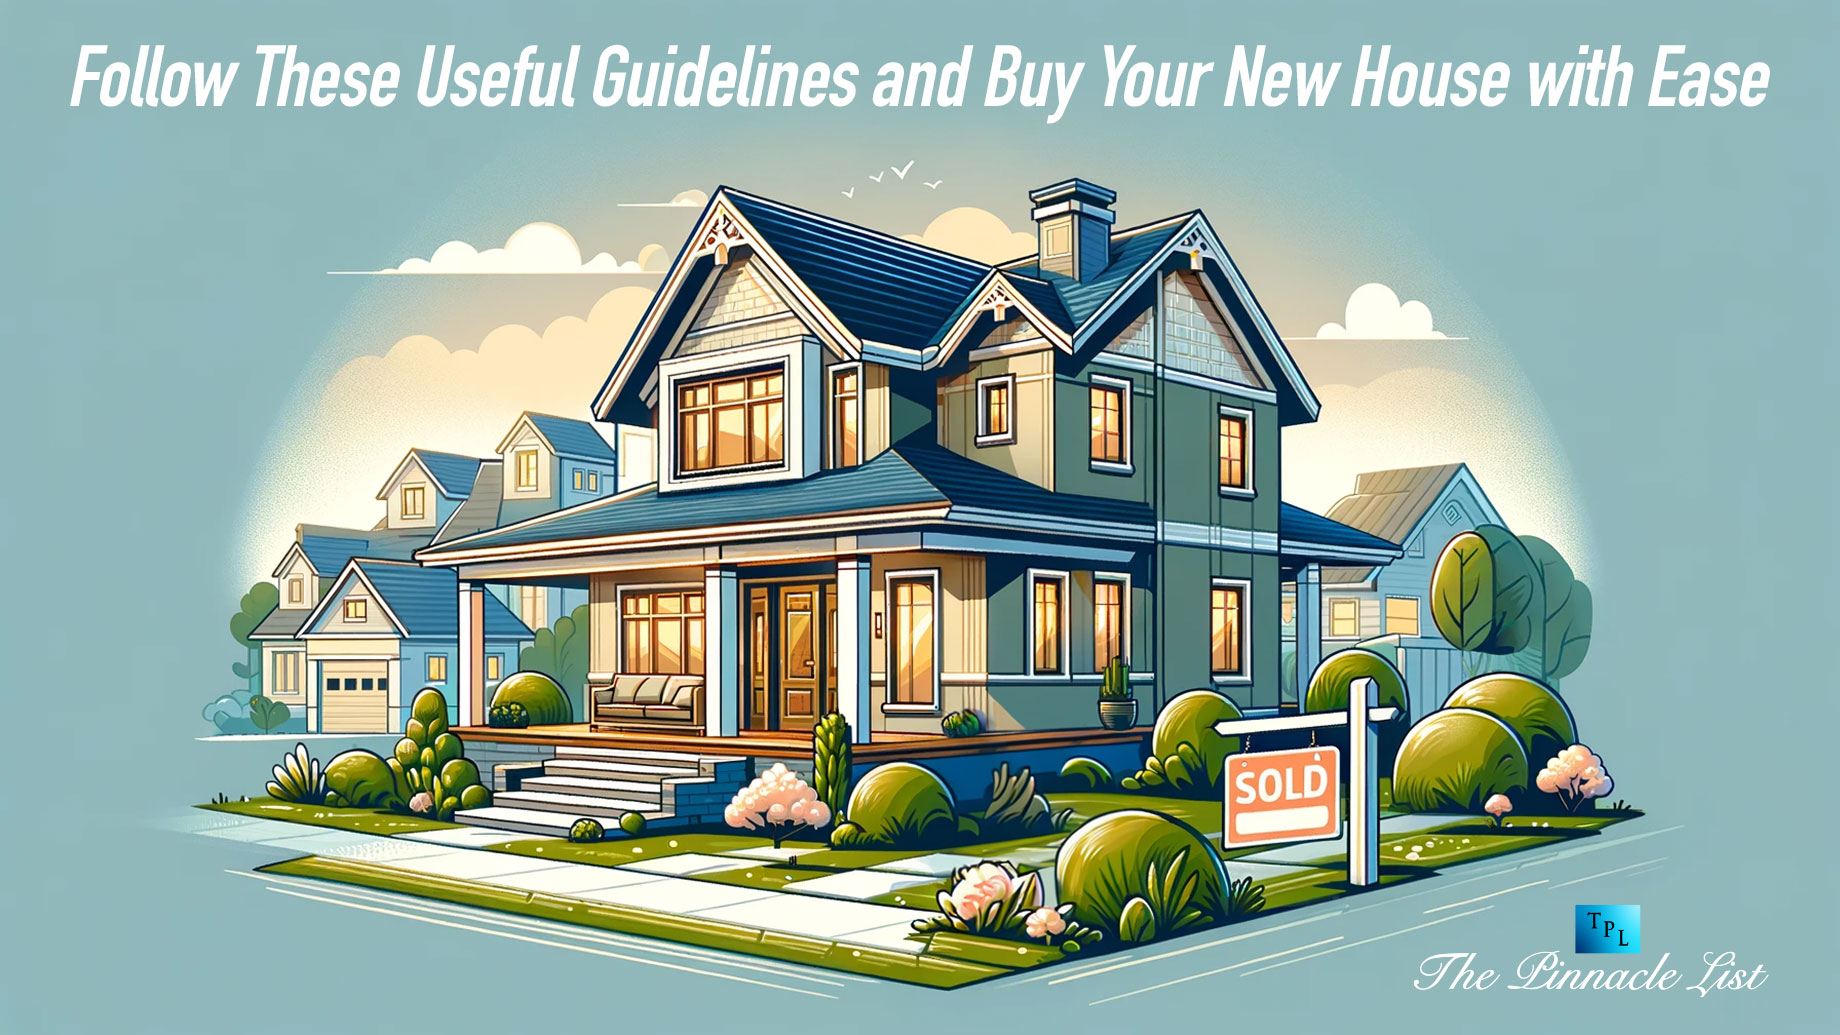 Follow These Useful Guidelines and Buy Your New House with Ease